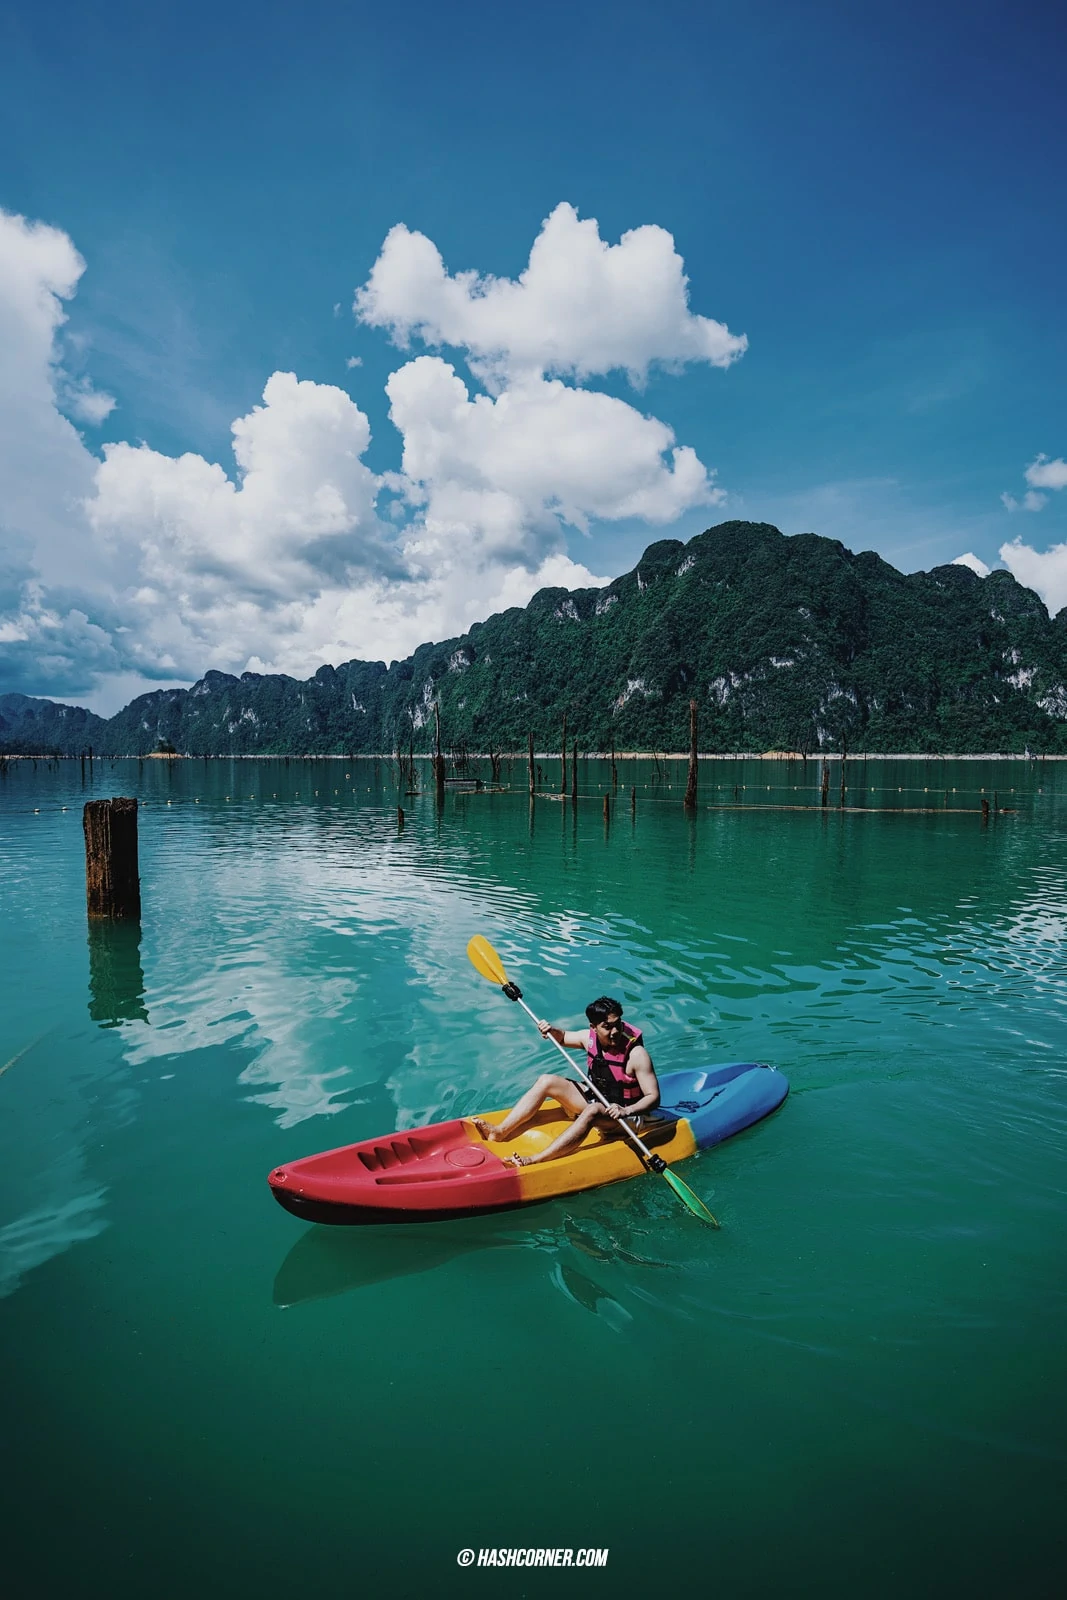 Surat Thani: A Local&#8217;s In-depth Travel Review